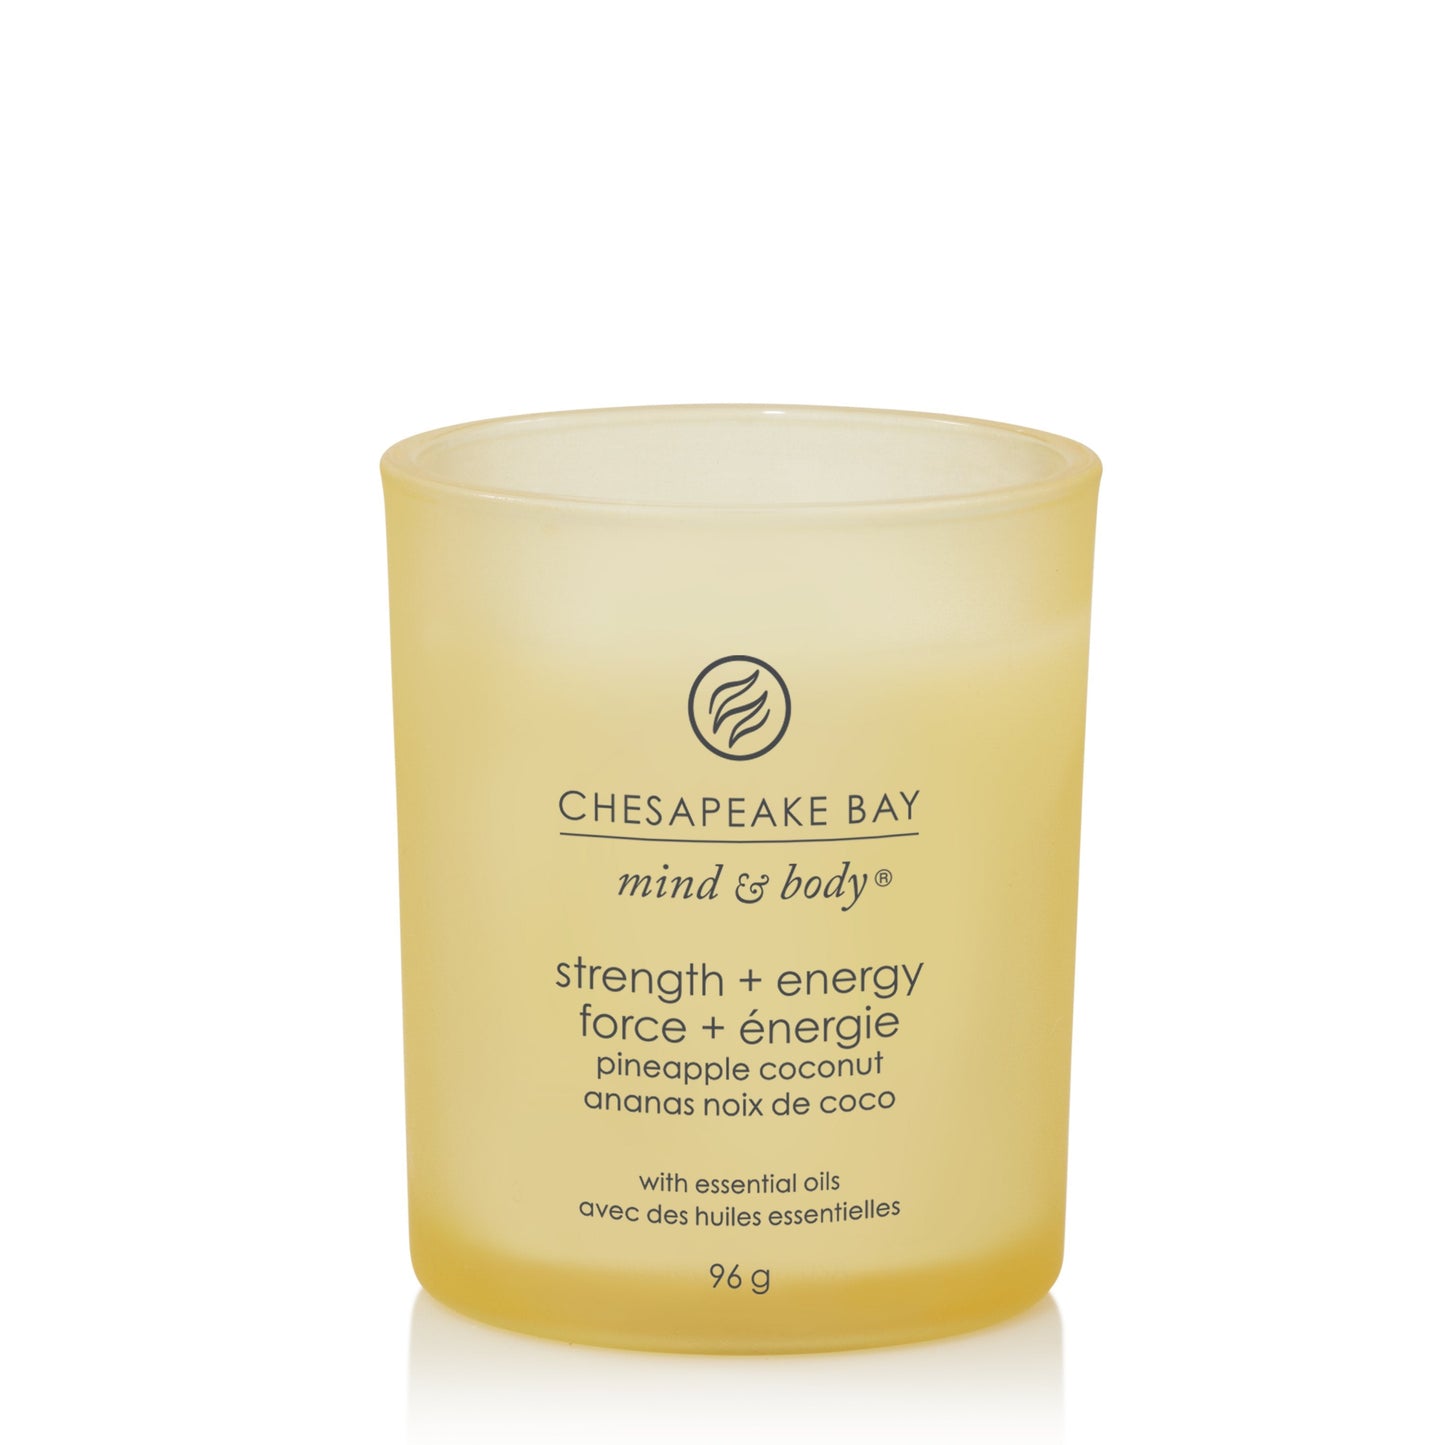 Chesapeake Bay Pineapple Coconut Small Candle